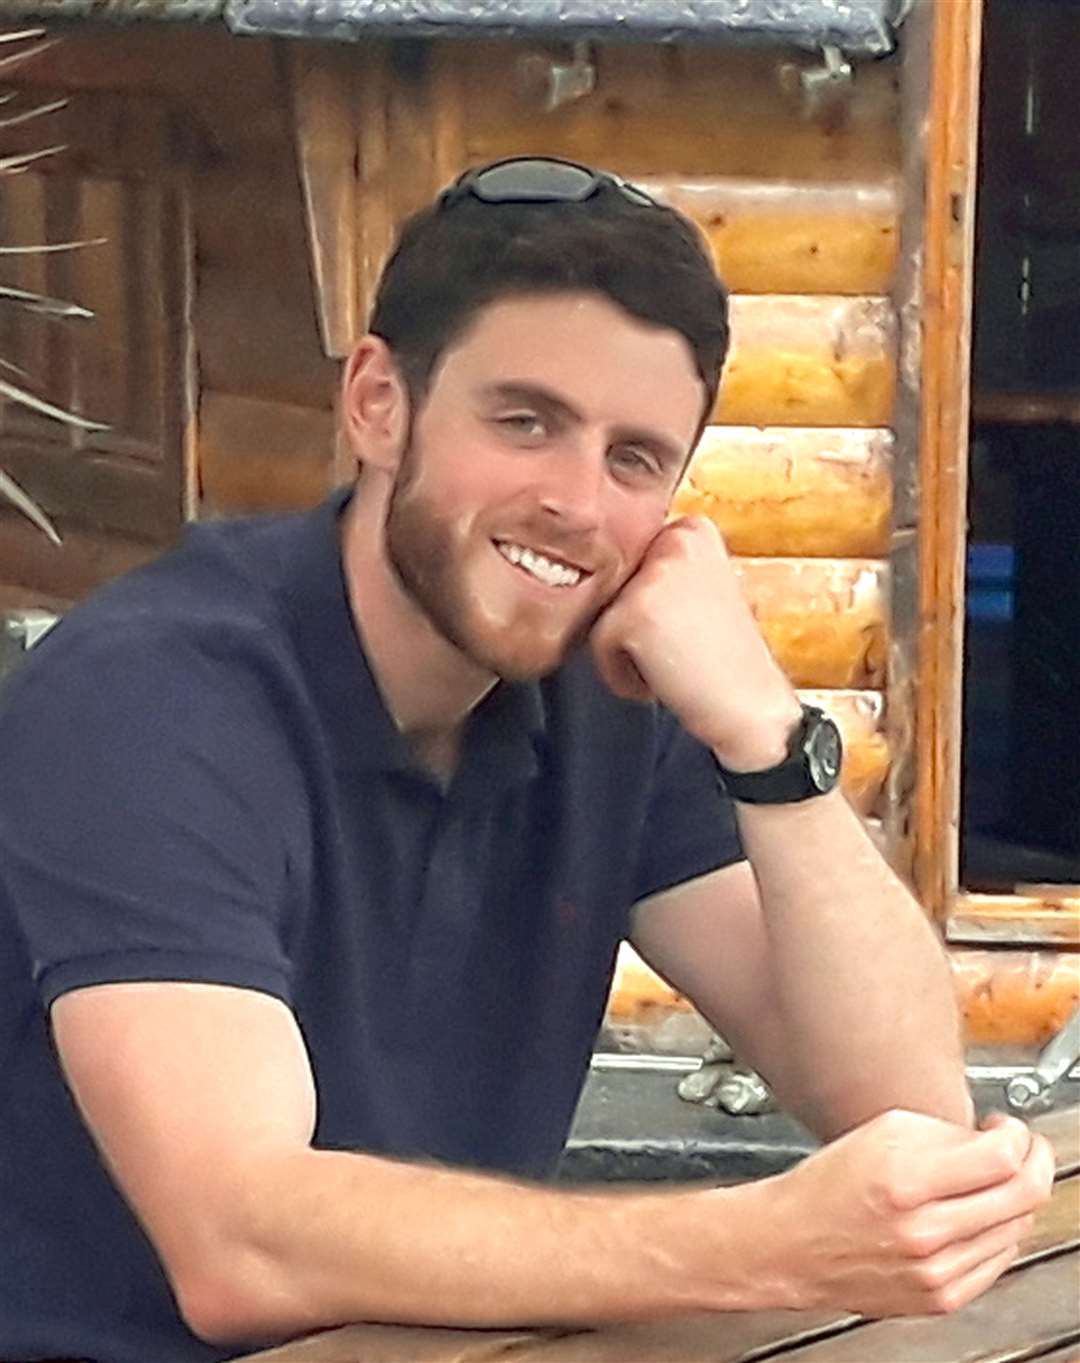 Police constable Andrew Harper was killed near Sulhamstead in 2019 (Thames Valley Police)